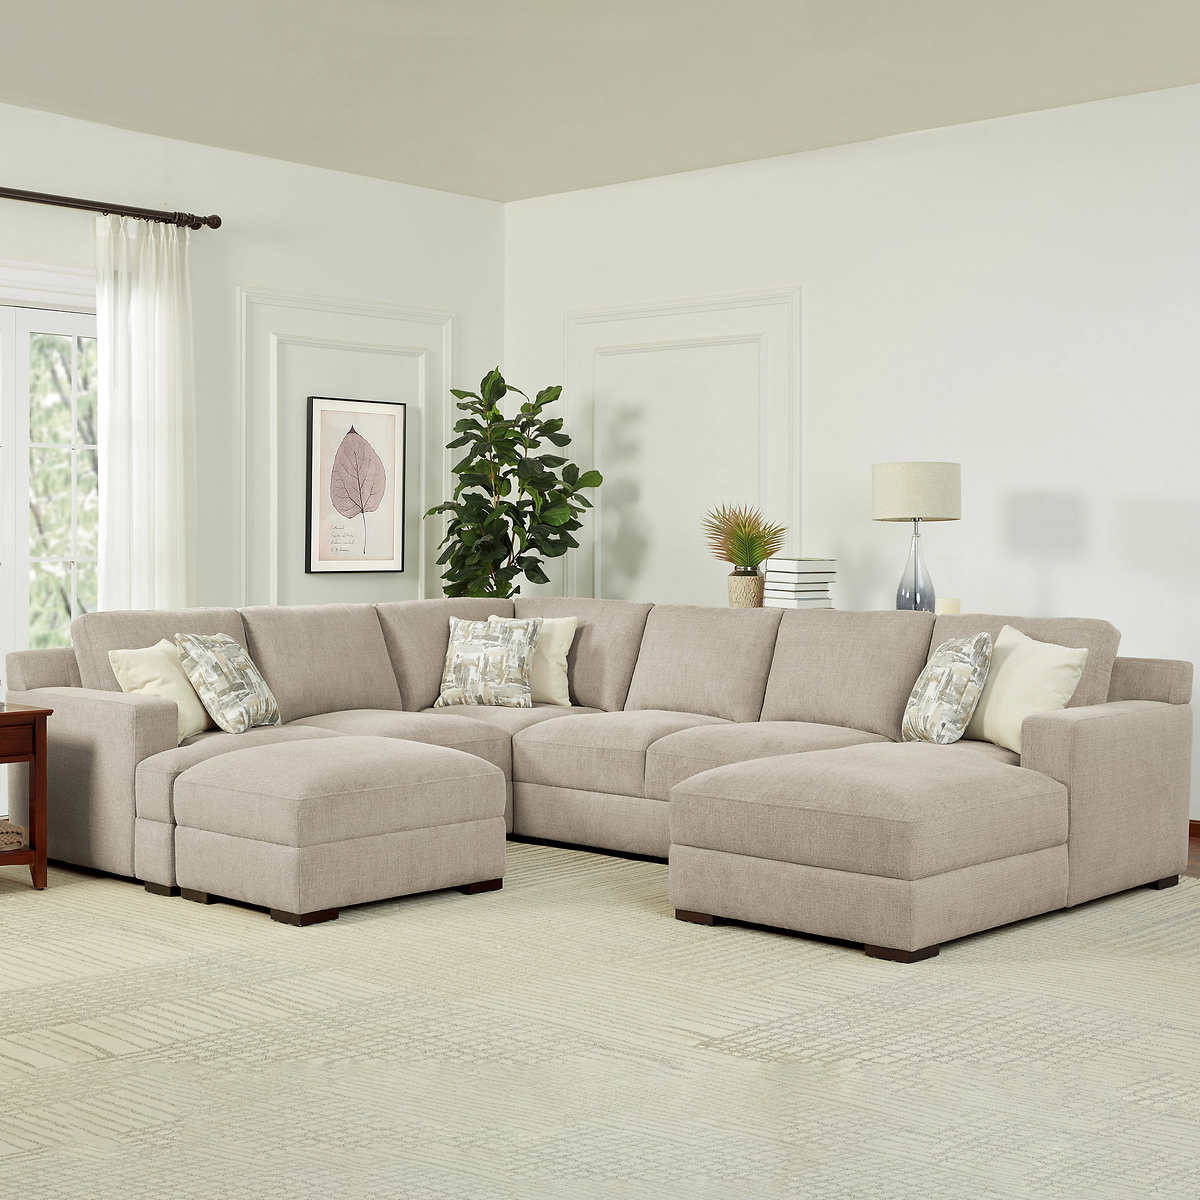 4 Piece Fabric Sectional Costco, How Many Yards Of Fabric Does It Take To Cover A Sectional Sofa